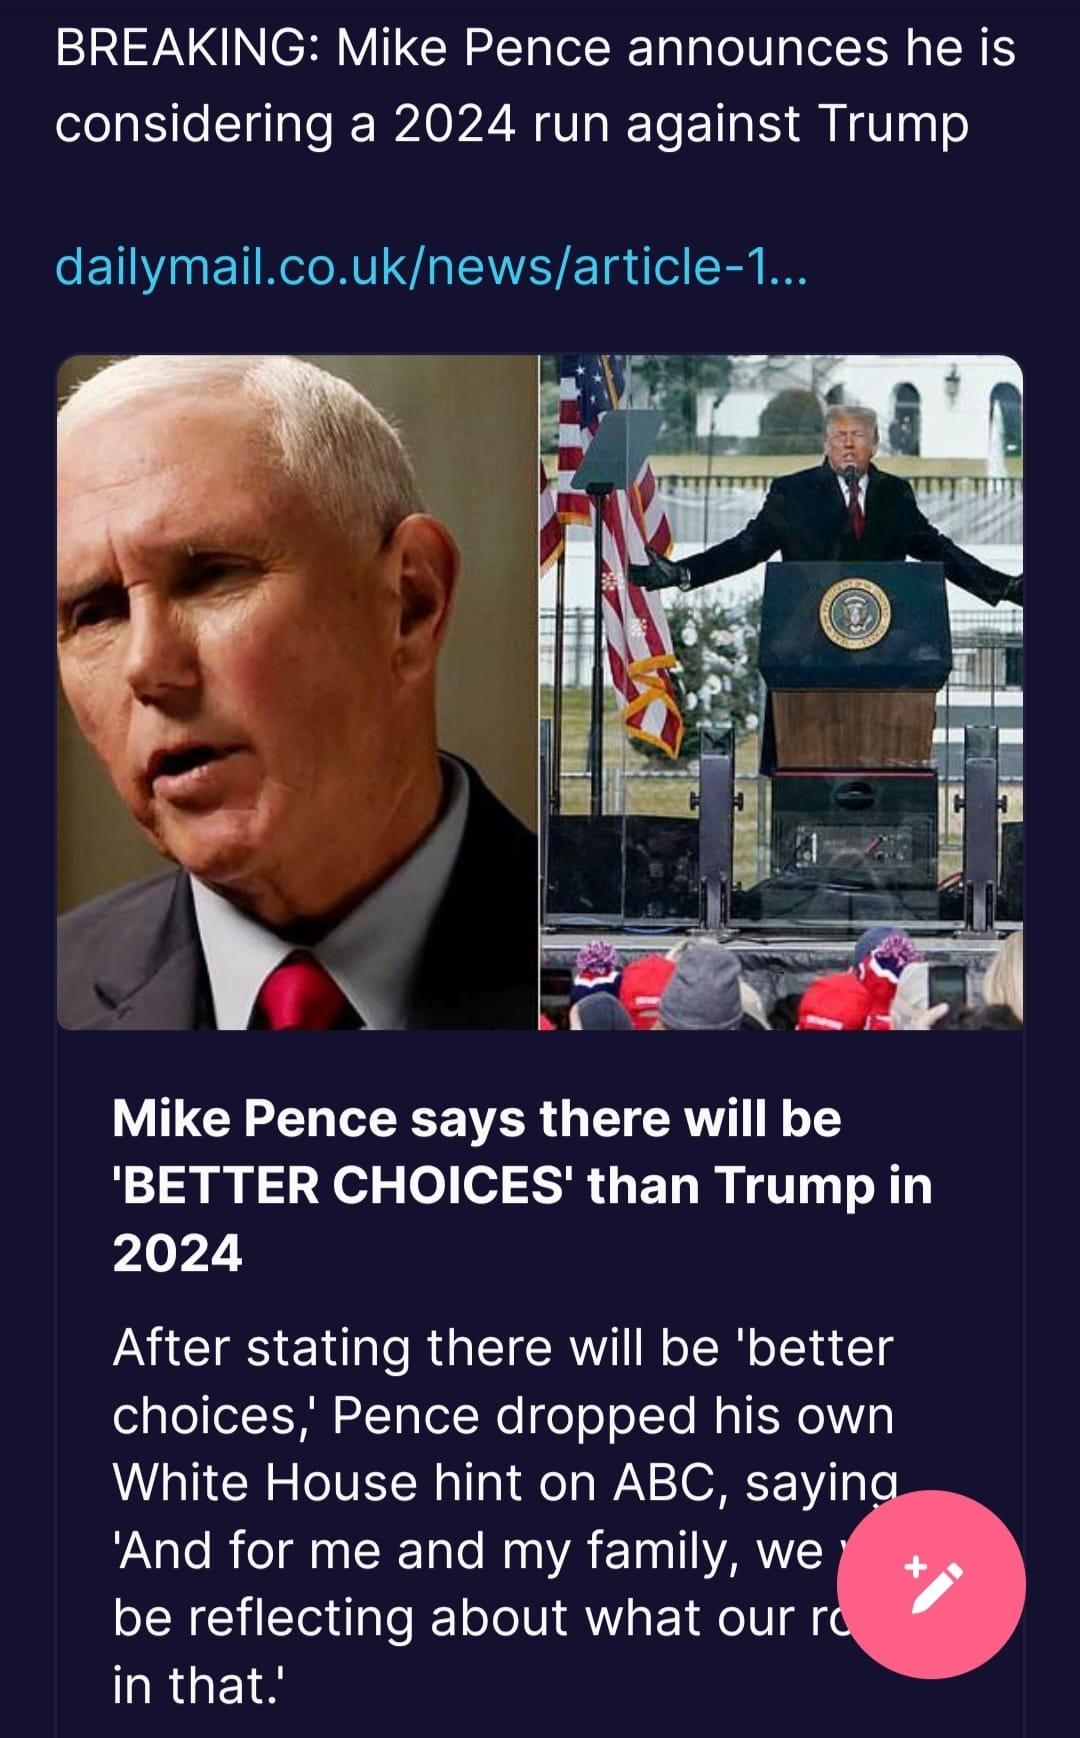 May be an image of 2 people and text that says 'BREAKING: Mike Pence announces he is considering a 2024 run against Trump dailymail.co.uk/news/article- Mike Pence says there will be 'BETTER CHOICES' than Trump in 2024 After stating there will be 'better choices, Pence dropped his own White House hint on ABC, saying 'And for me and my family, we be reflecting about what our ro in that.''